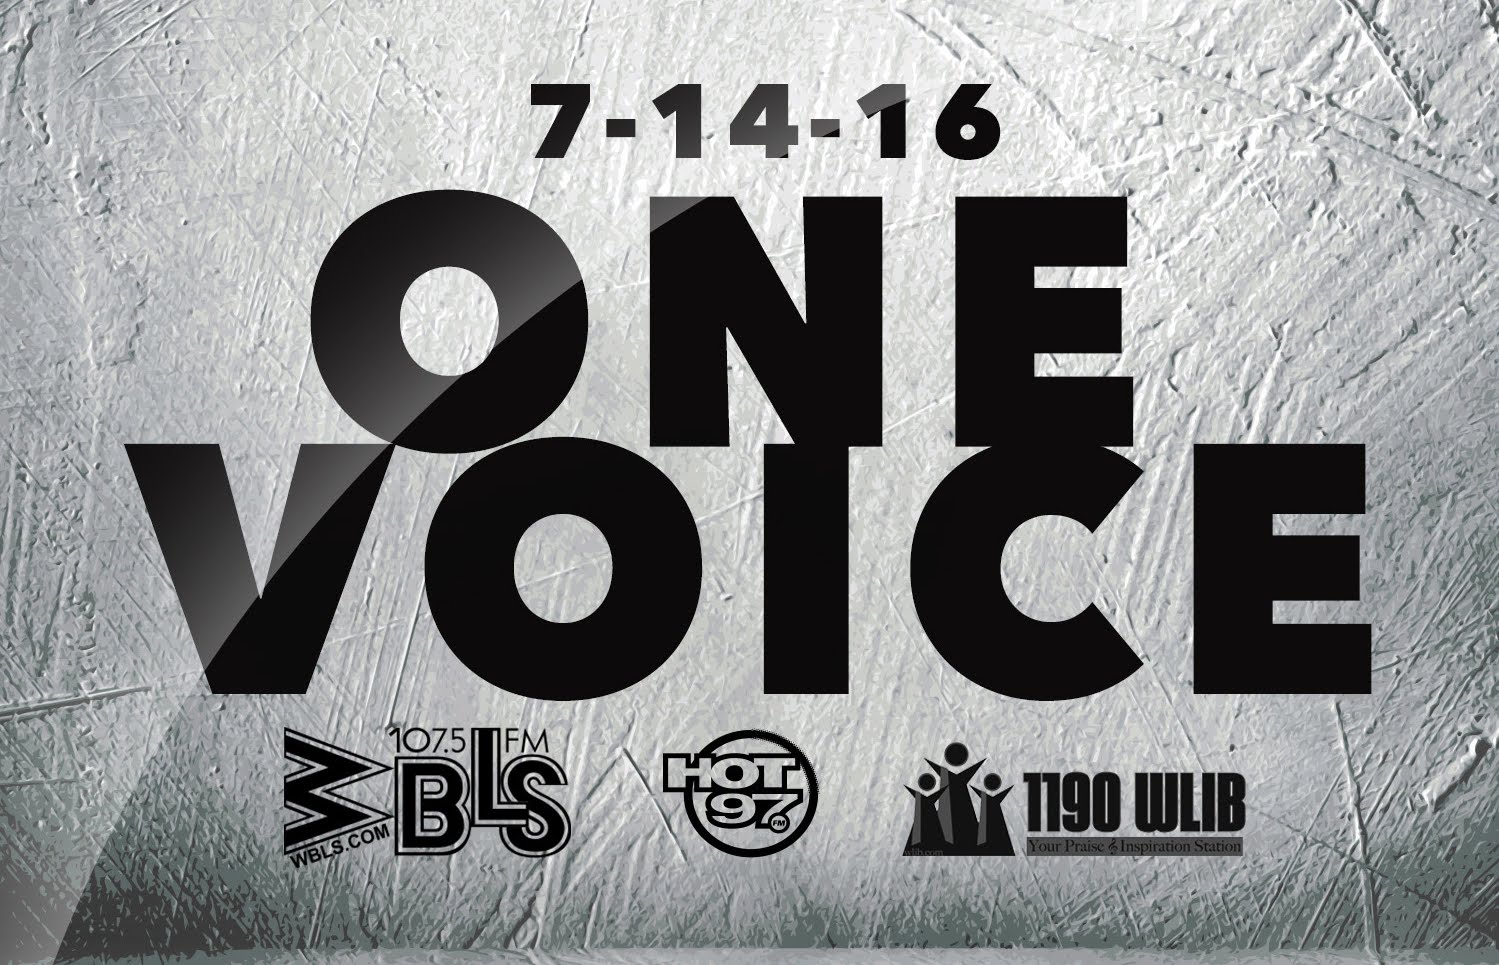 One Voice : An open discussion on the relationship between the African American community and the police